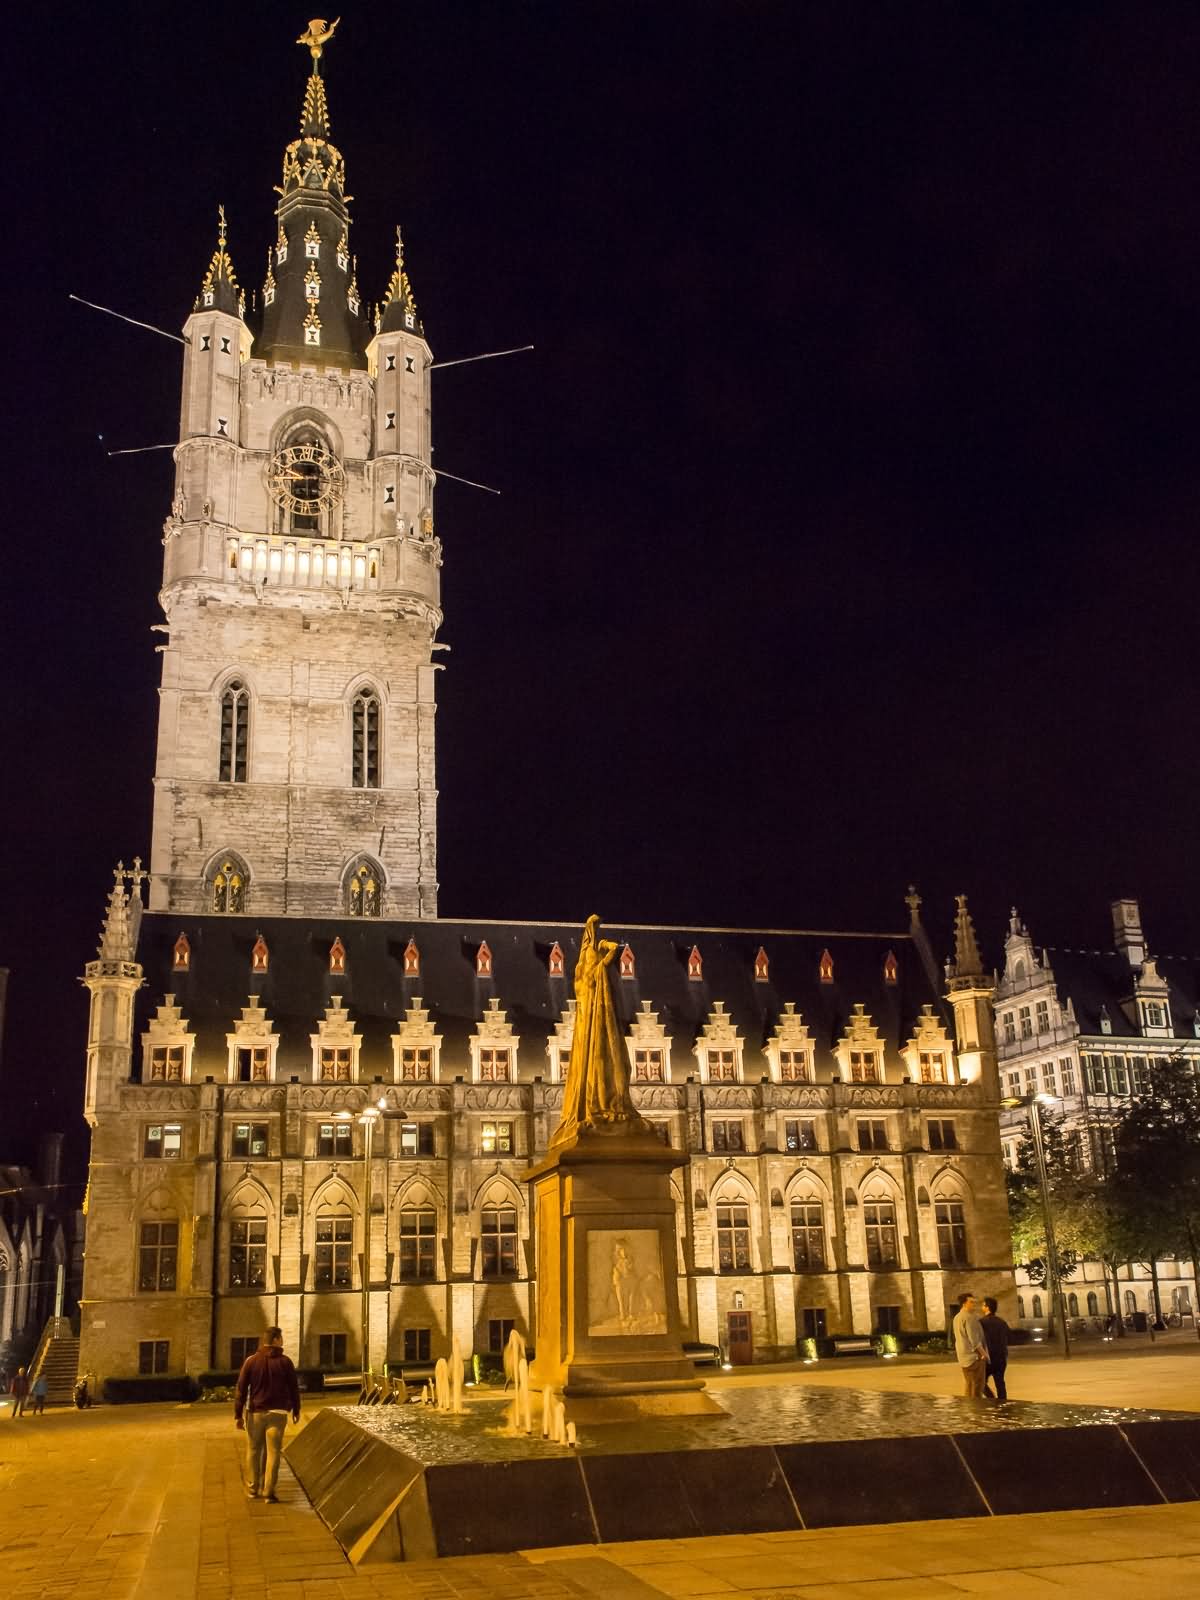 Saint Nicholas Church And Belfry Of Ghent At Night